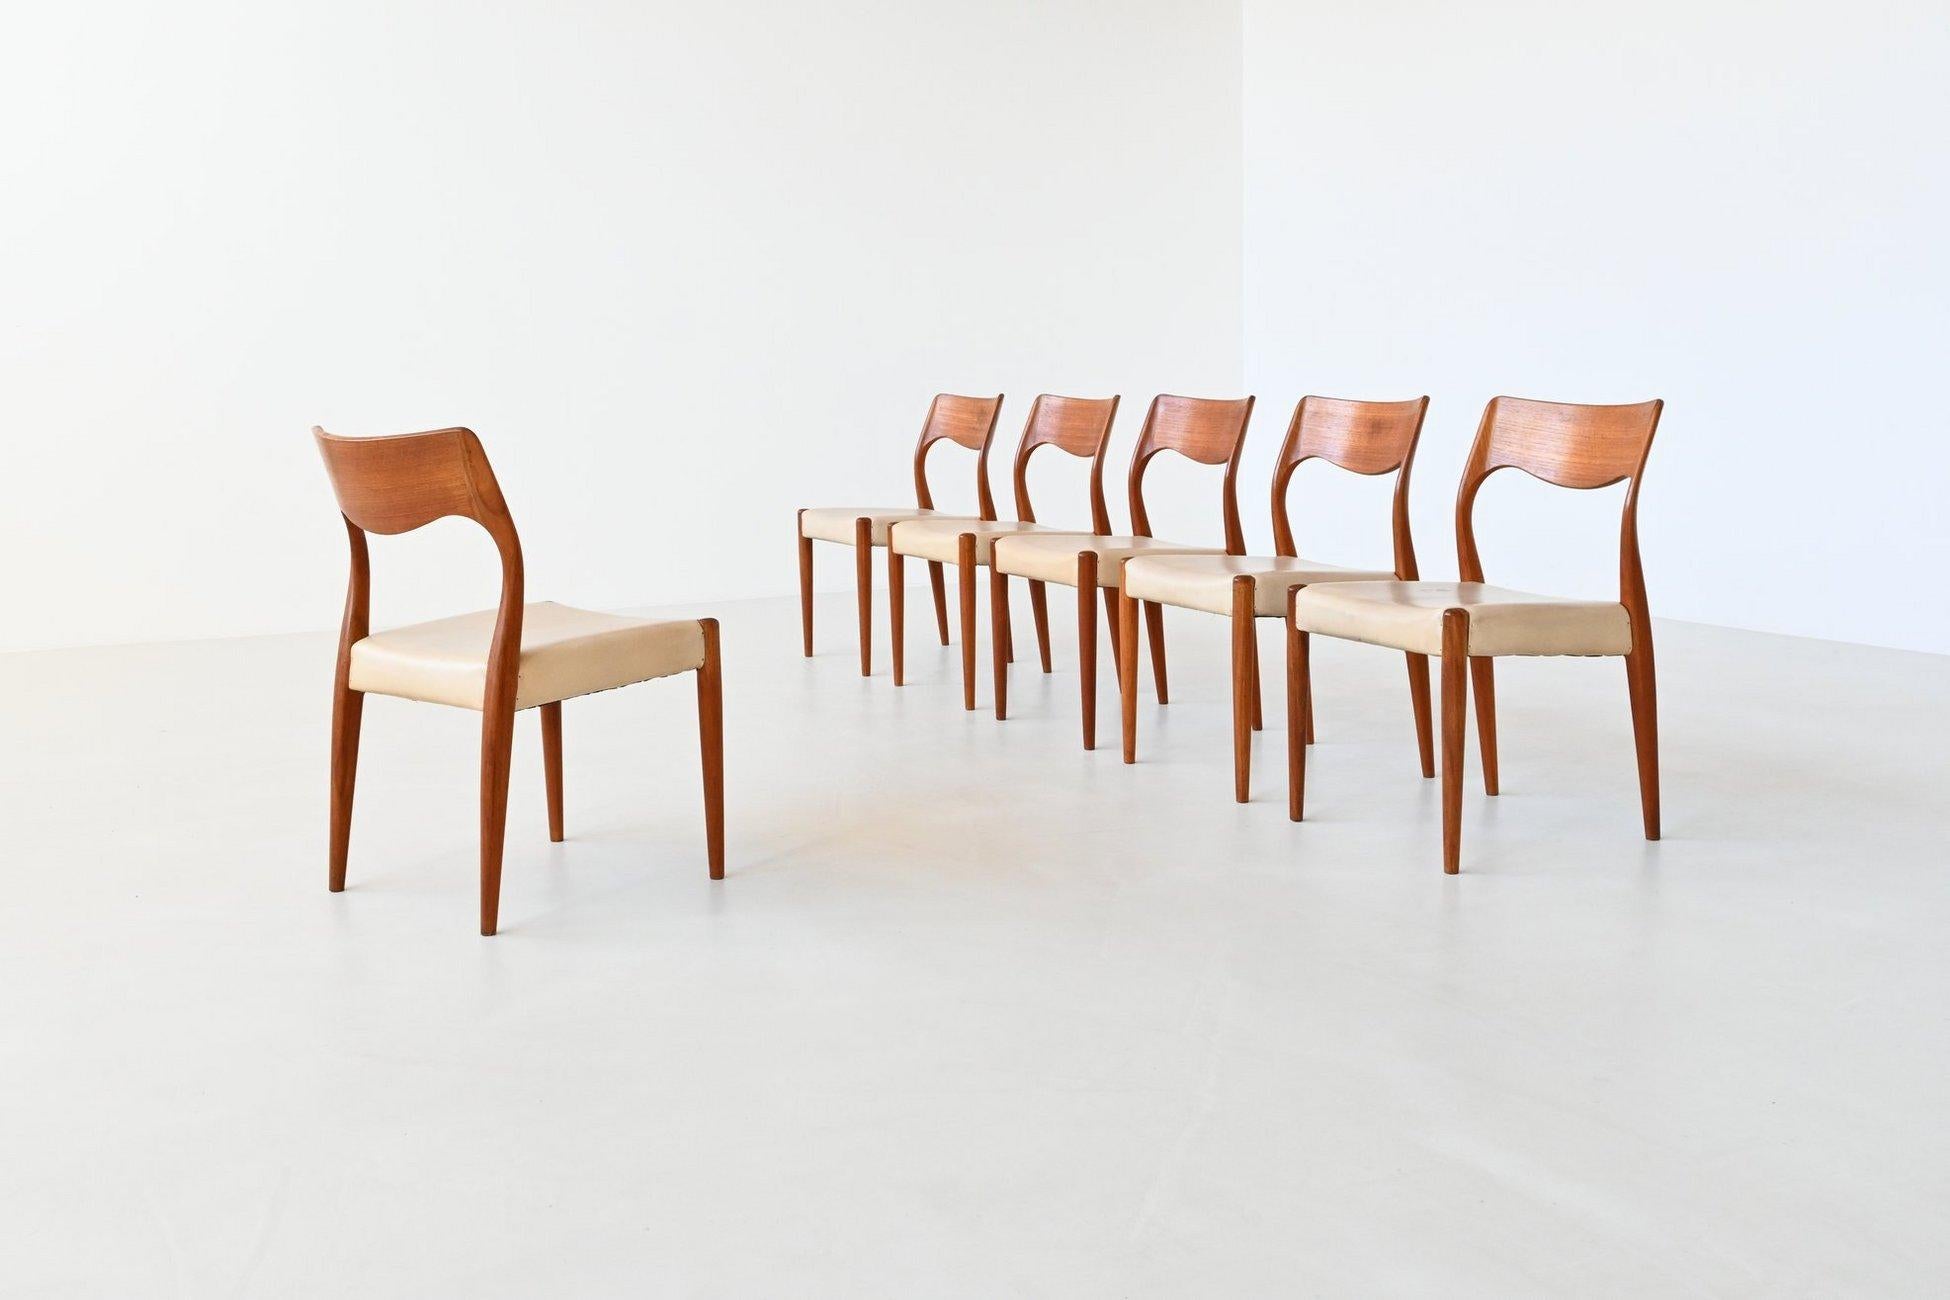 Beautiful set of six dining chairs manufactured by Fristho Franeker under license from J.L. Møller Møbelfabrik, The Netherlands 1954. These very nice elegant shaped chairs are made of solid teak wood and the seats are covered with original crème